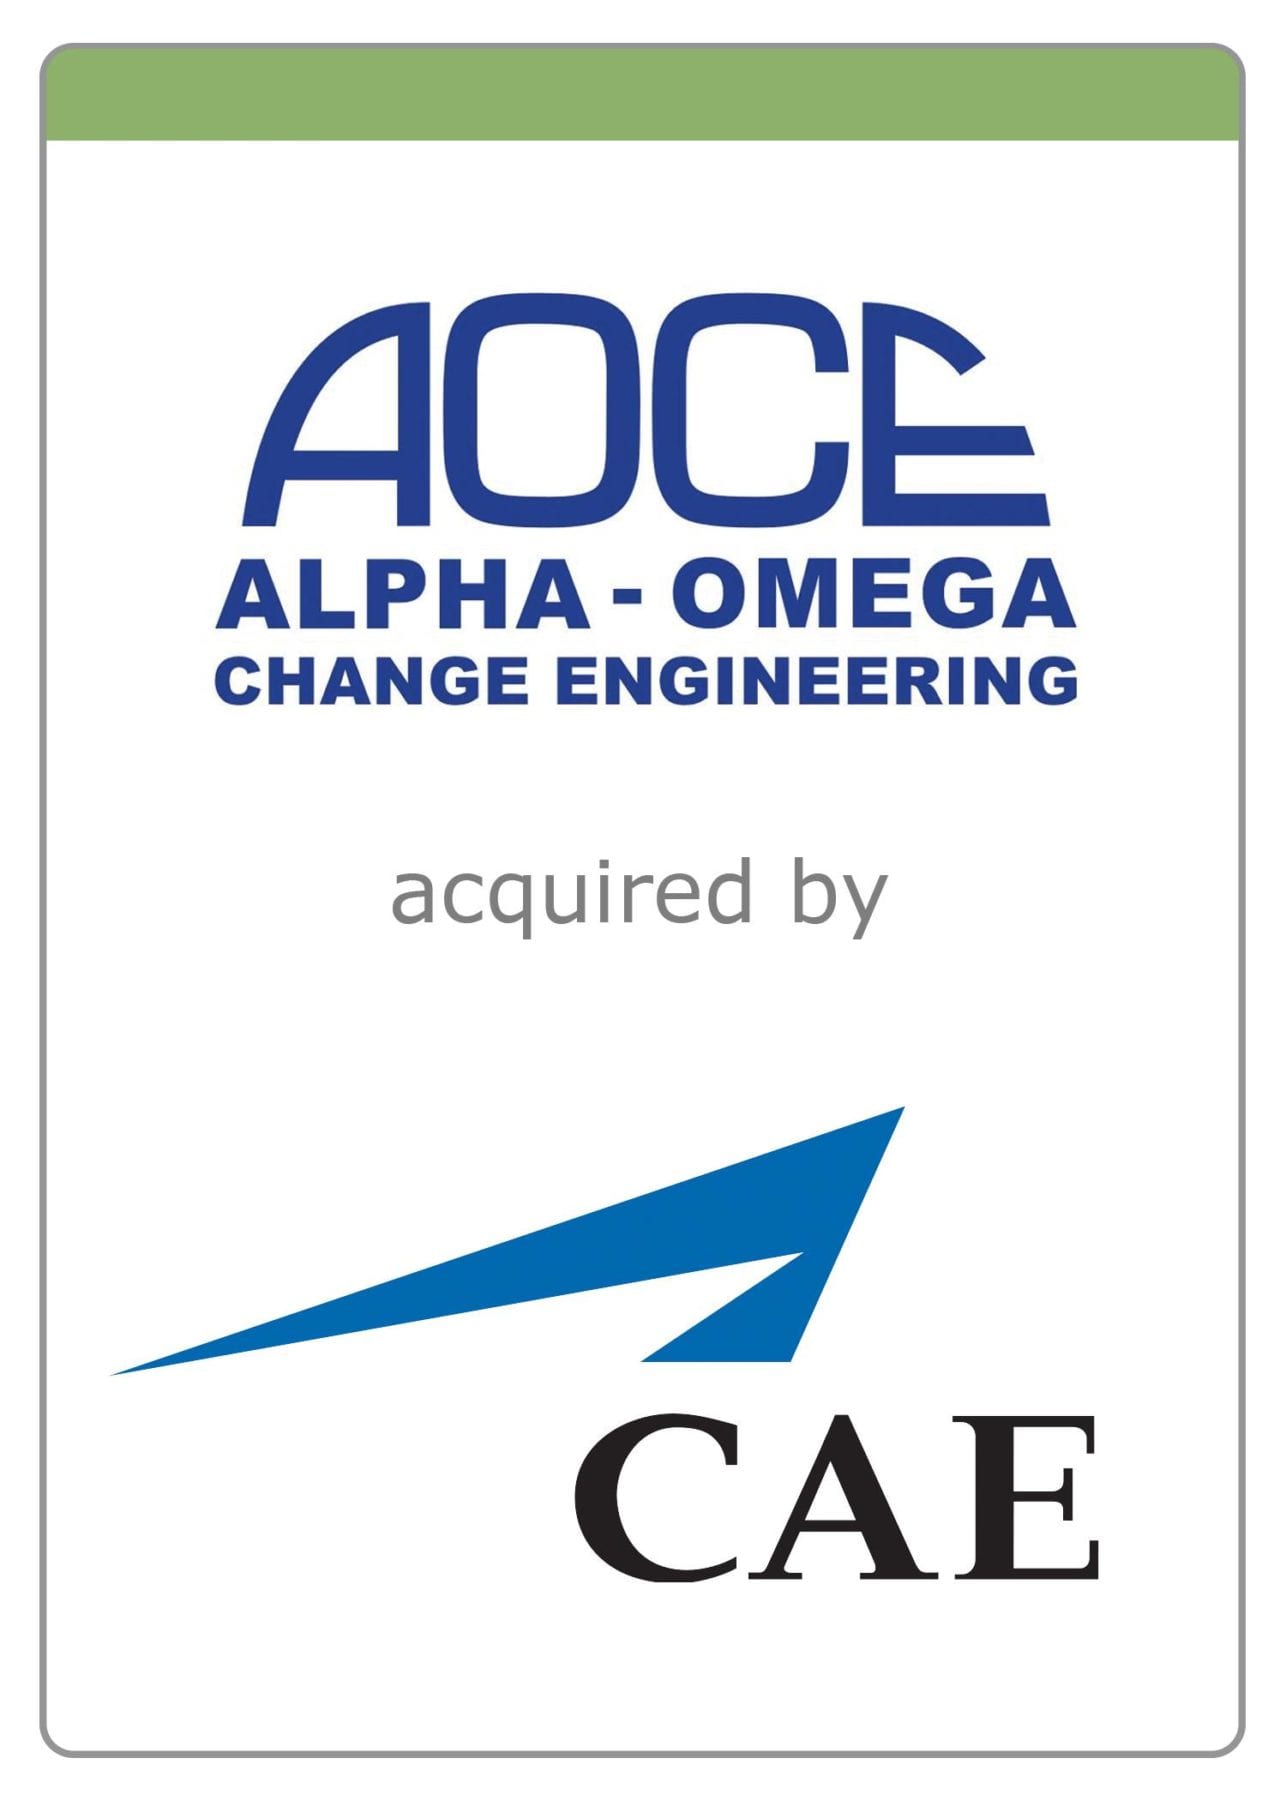 AOCE acquired by CAE - The McLean Group